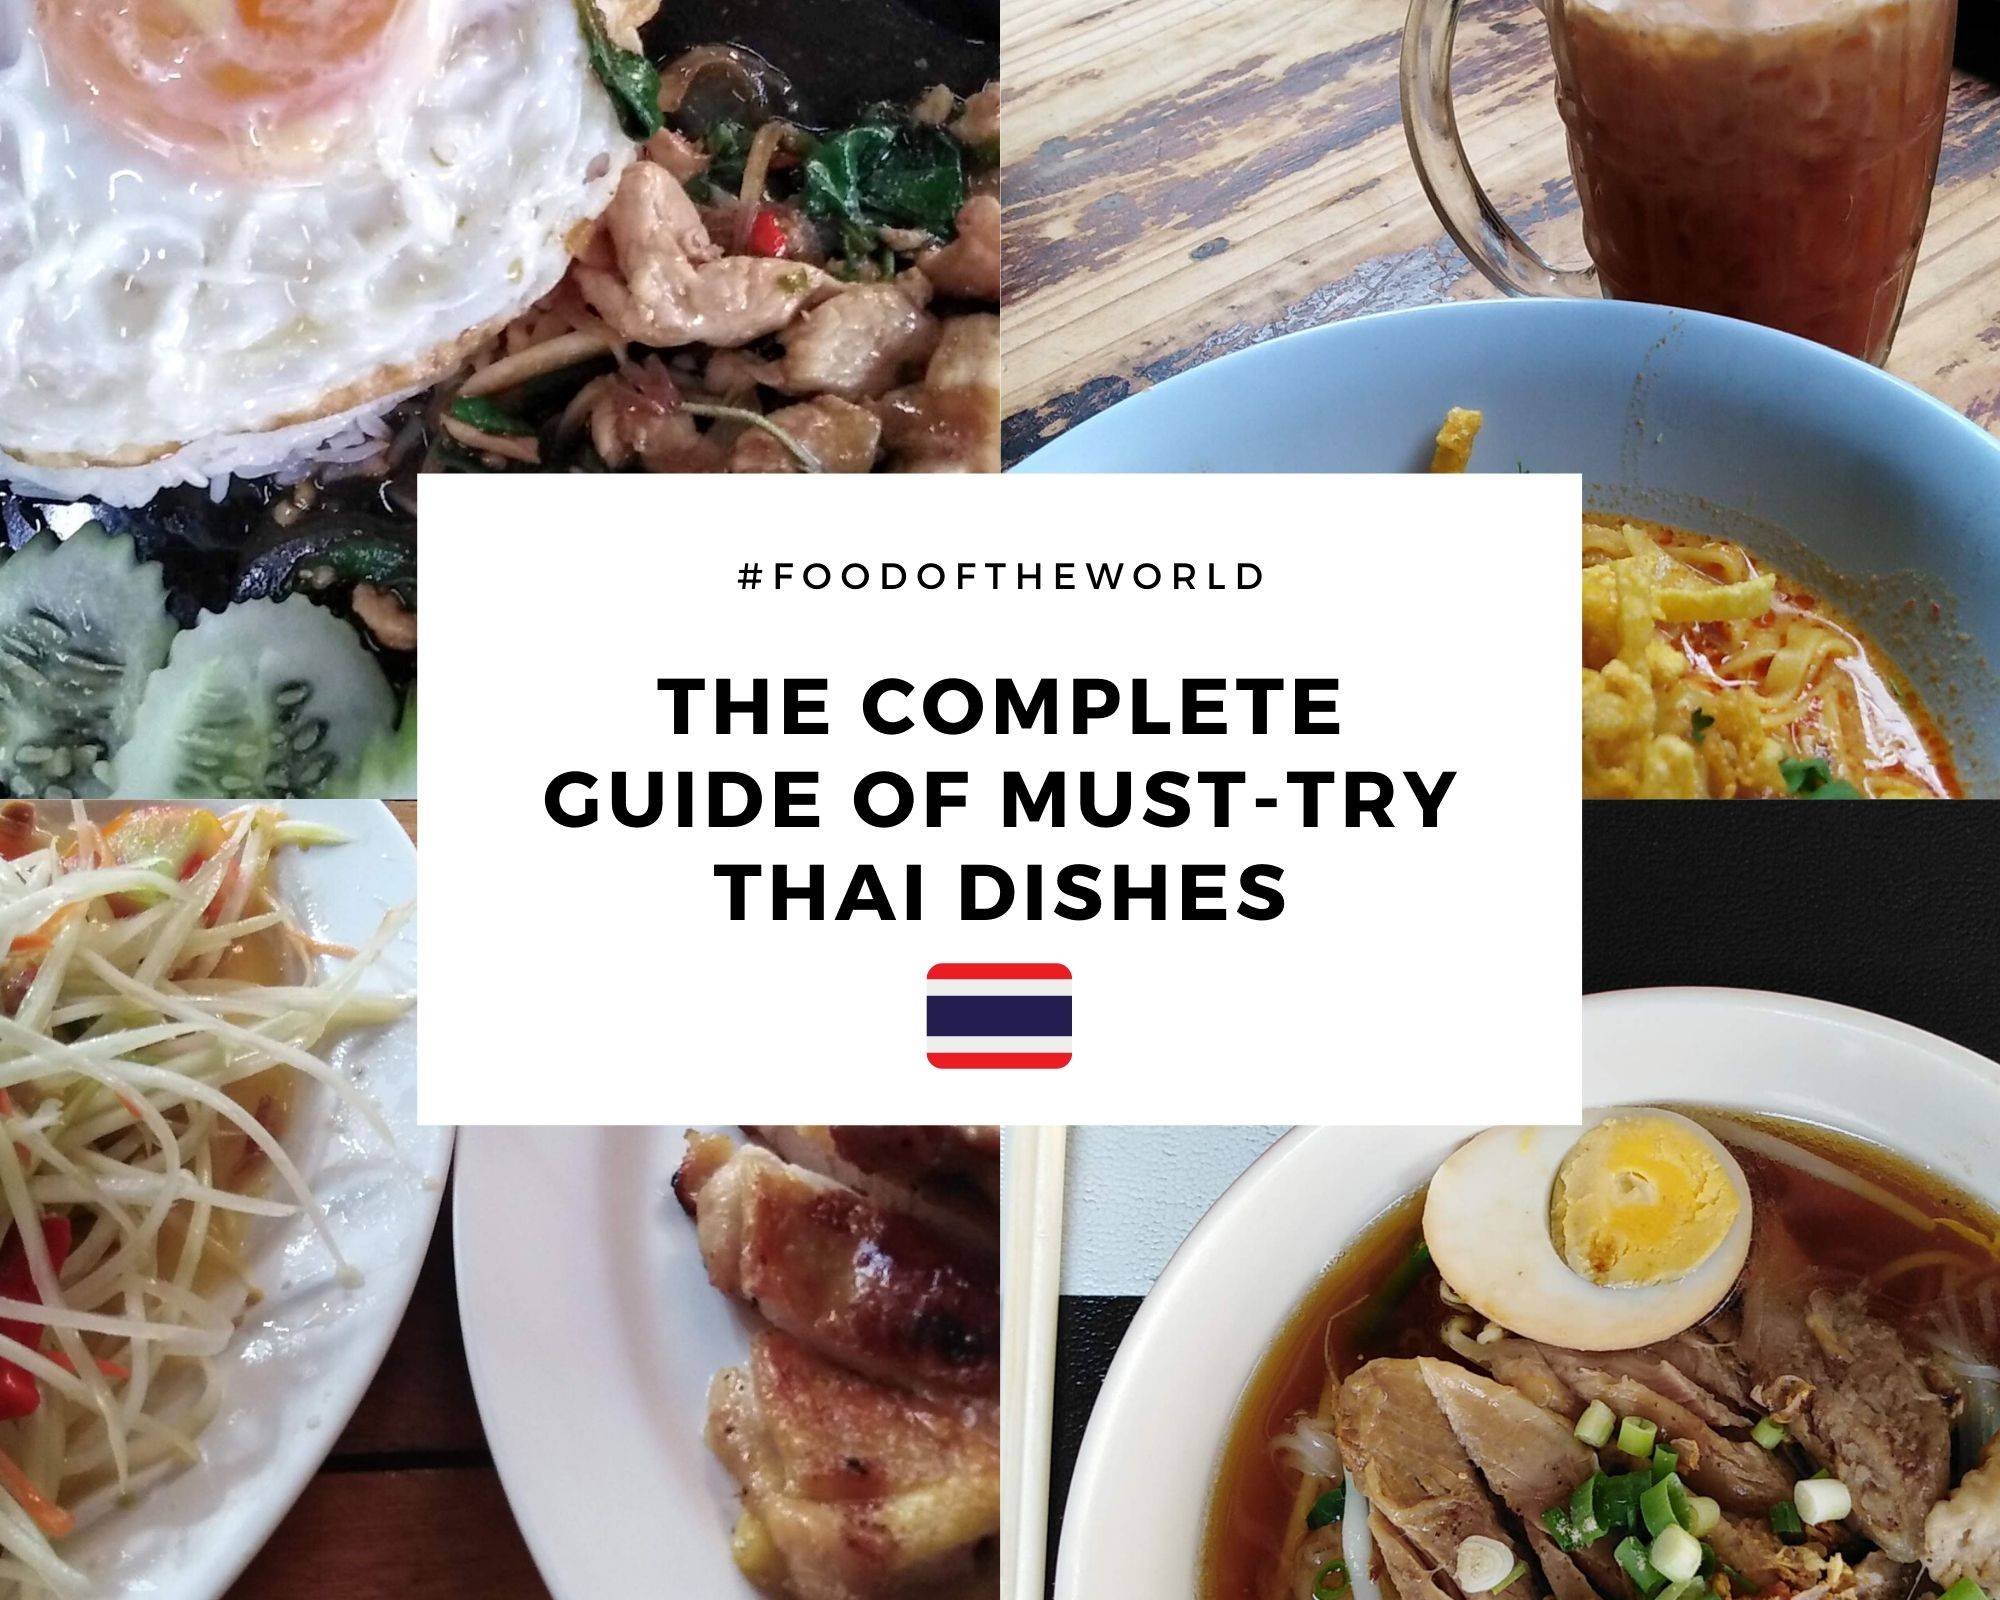 #foodoftheword: the complete guide of must-try Thai dishes 